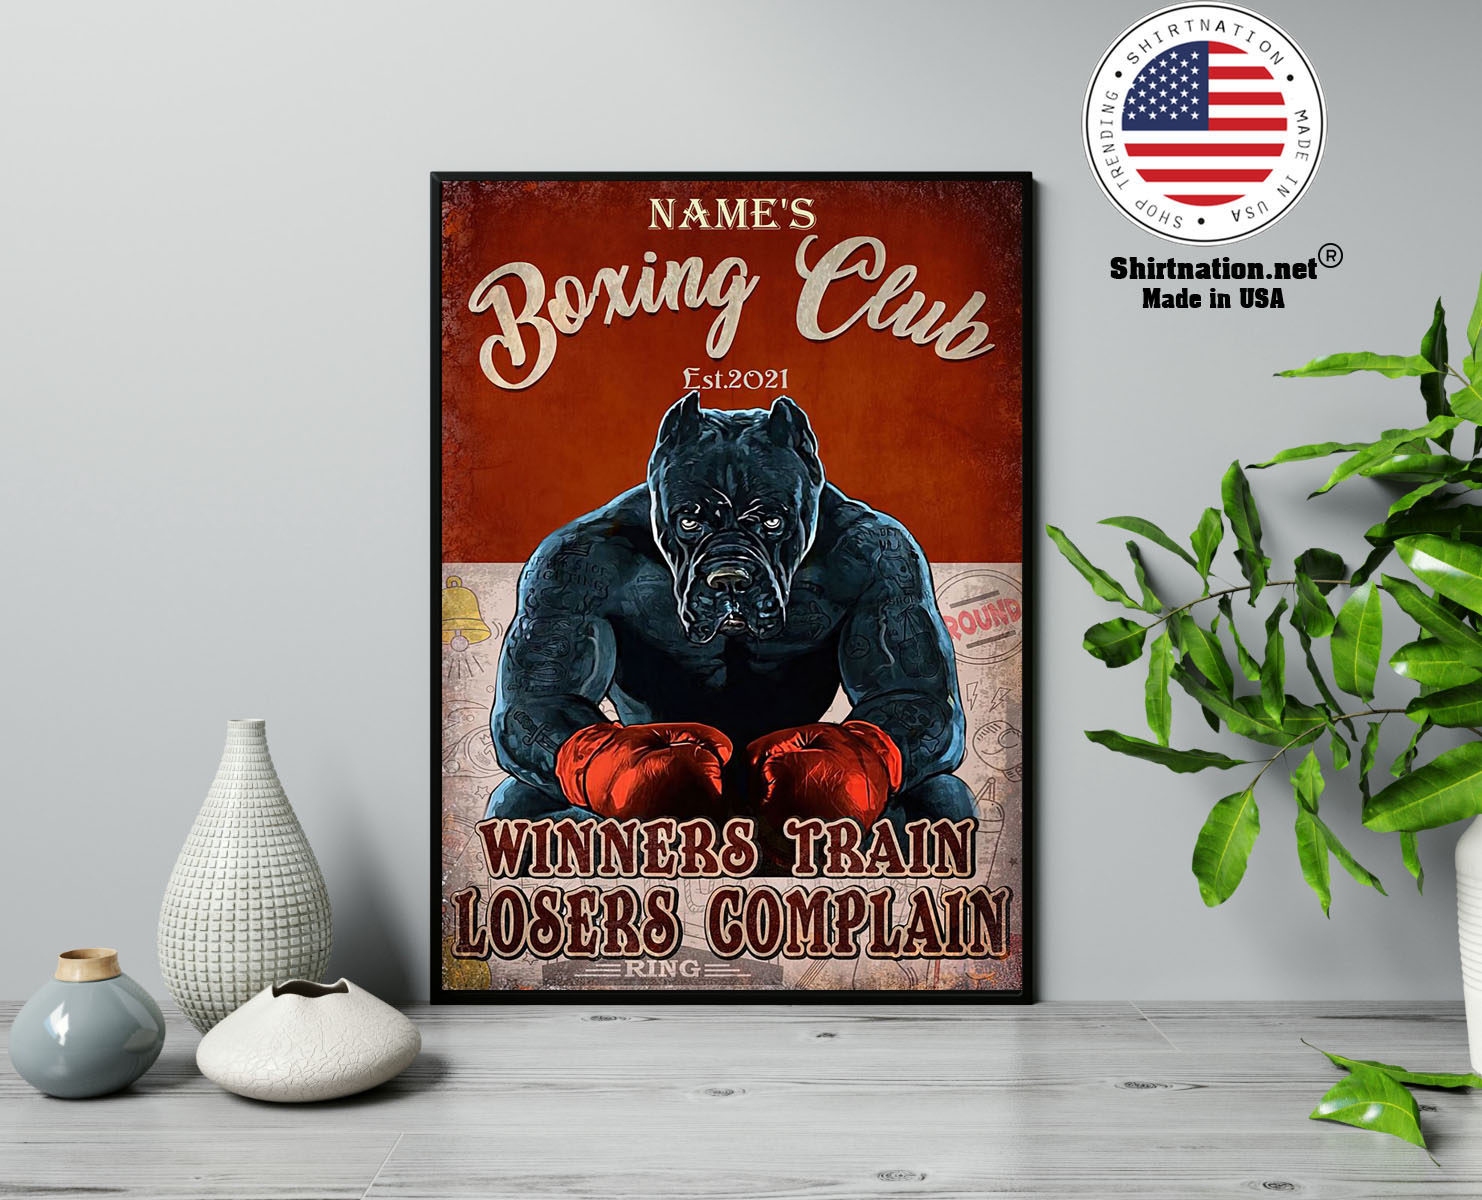 Boxing club winners train losers complain poster 13